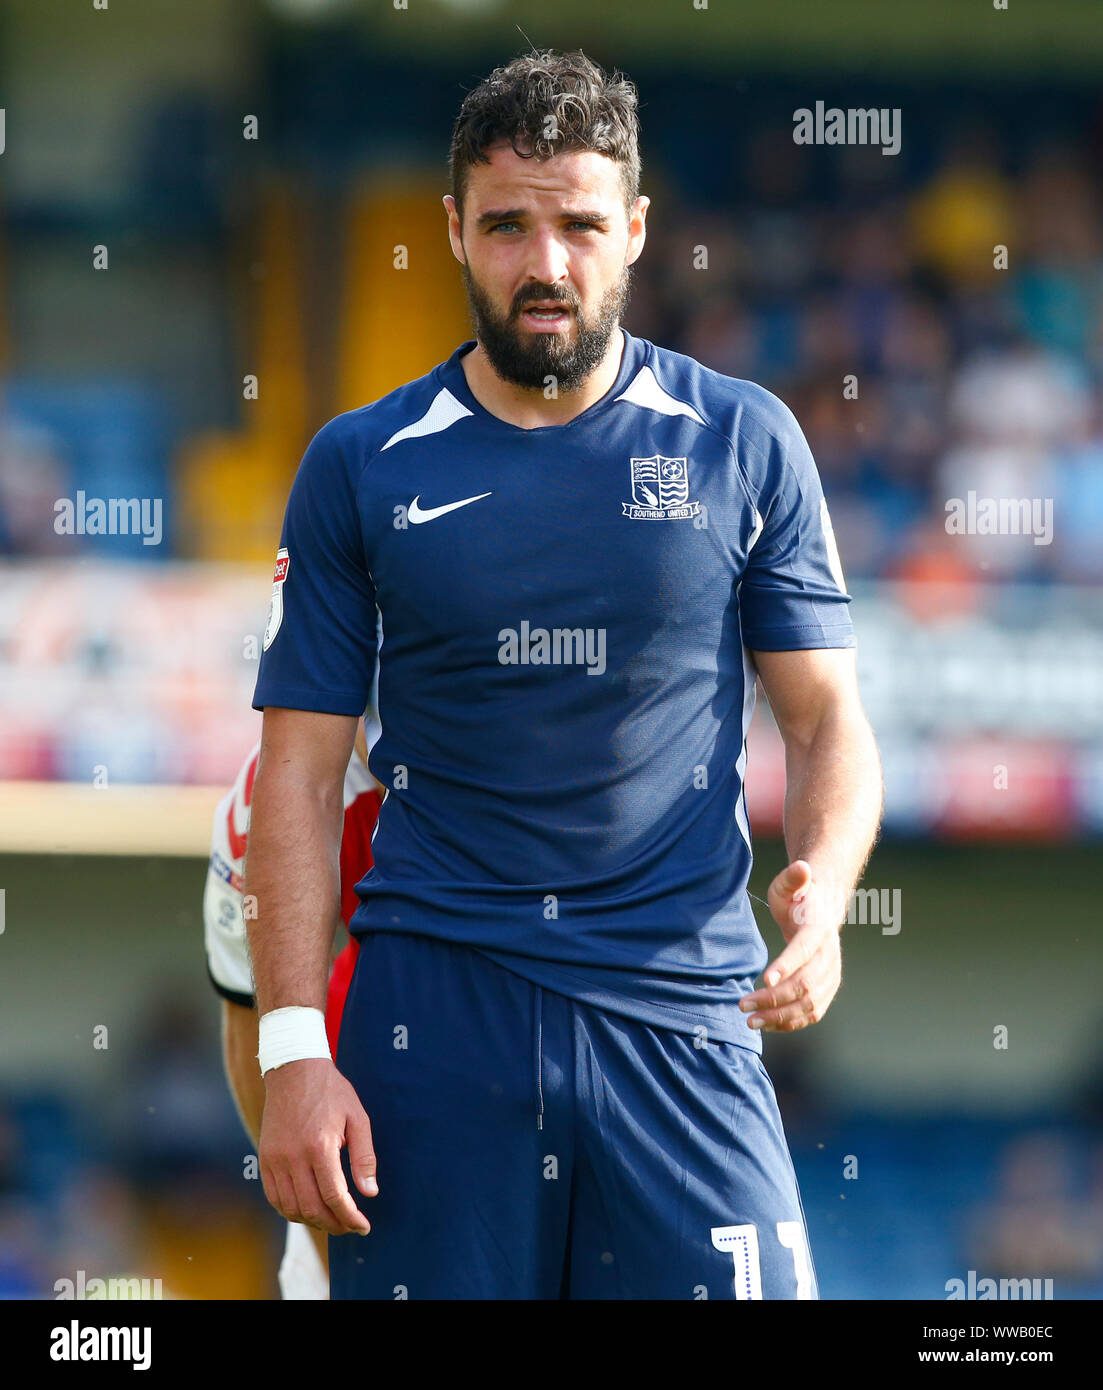 Southend, UK. 14th Sep, 2019. Stephen McLaughlin of Southend United during English Sky Bet League One between Southend United and Fleetwood Town at Roots Hall Stadium, Southend, England on 14 September 2019 Credit: Action Foto Sport/Alamy Live News Stock Photo